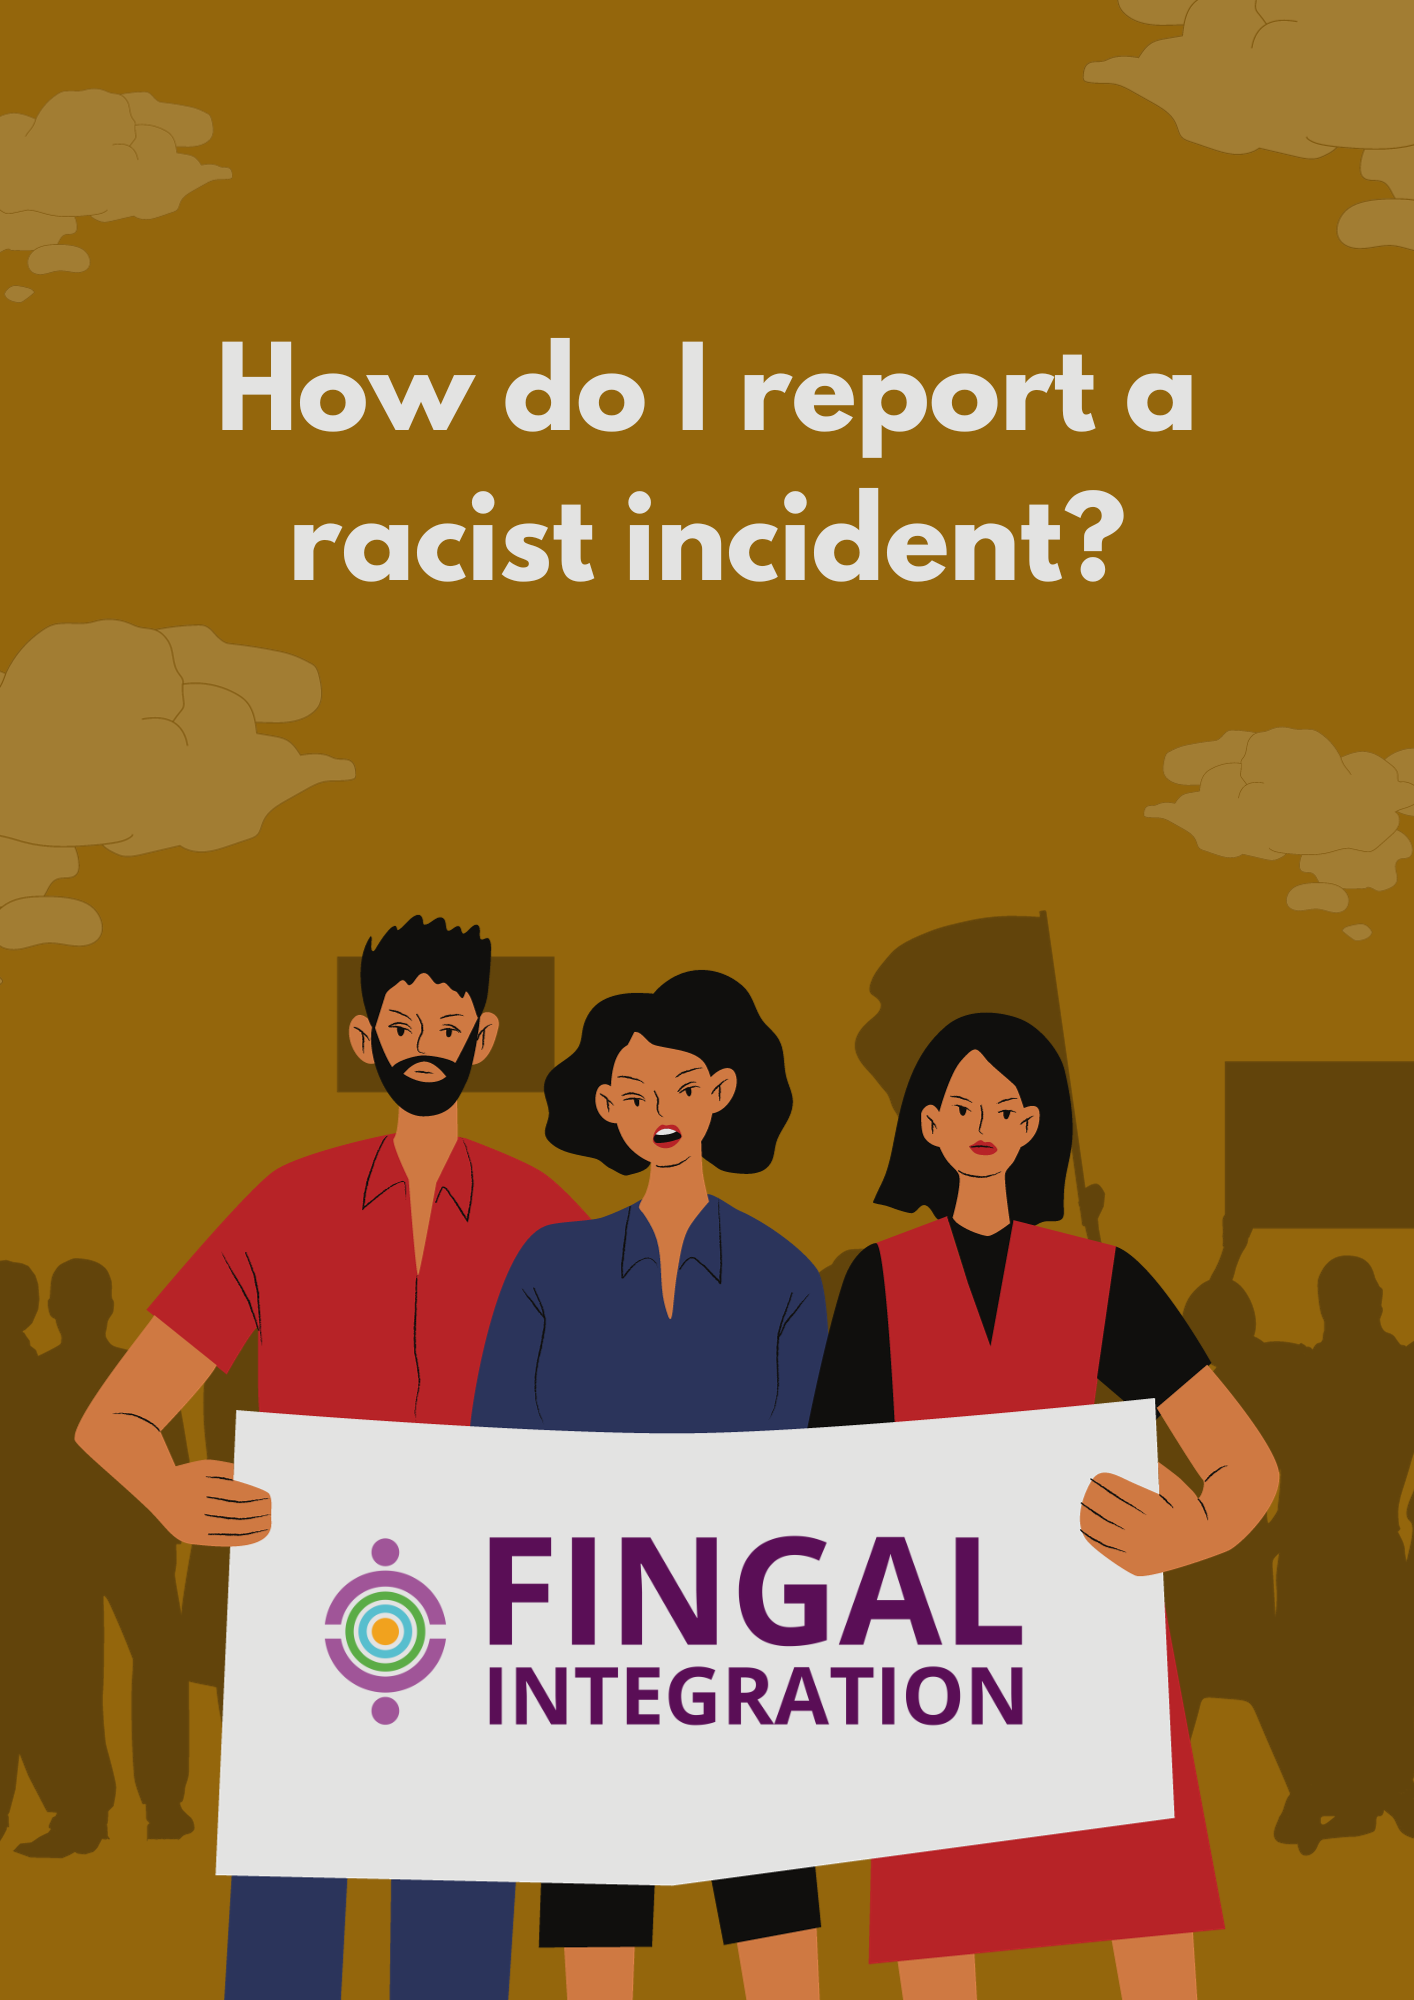 Fingal has been working to raise greater awareness of how people can report incidences of racism